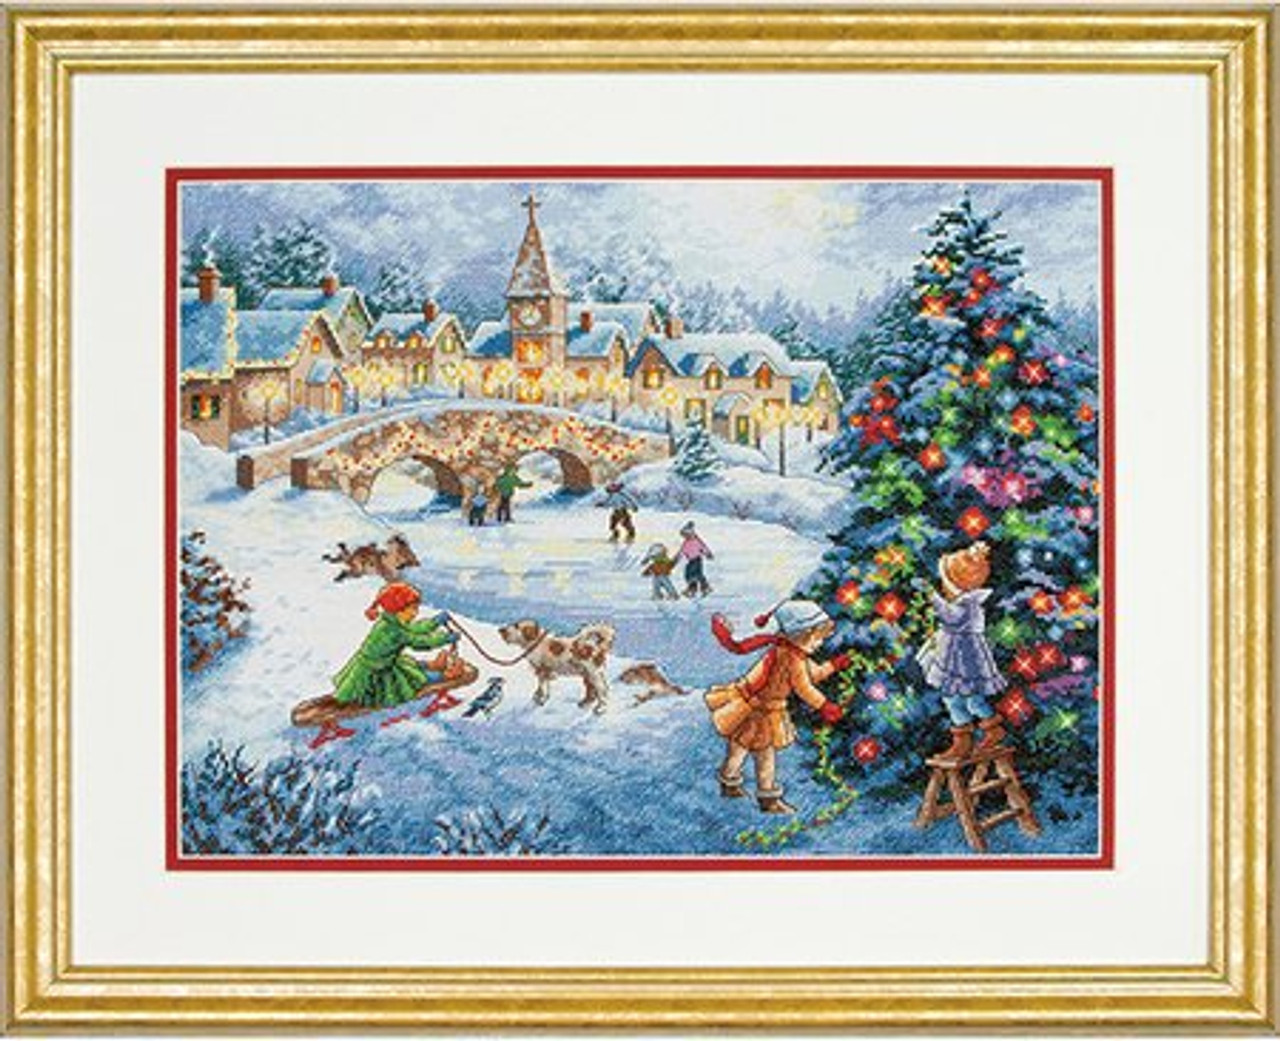 Dimensions Gold Collection Christmas Village Counted Cross Stitch